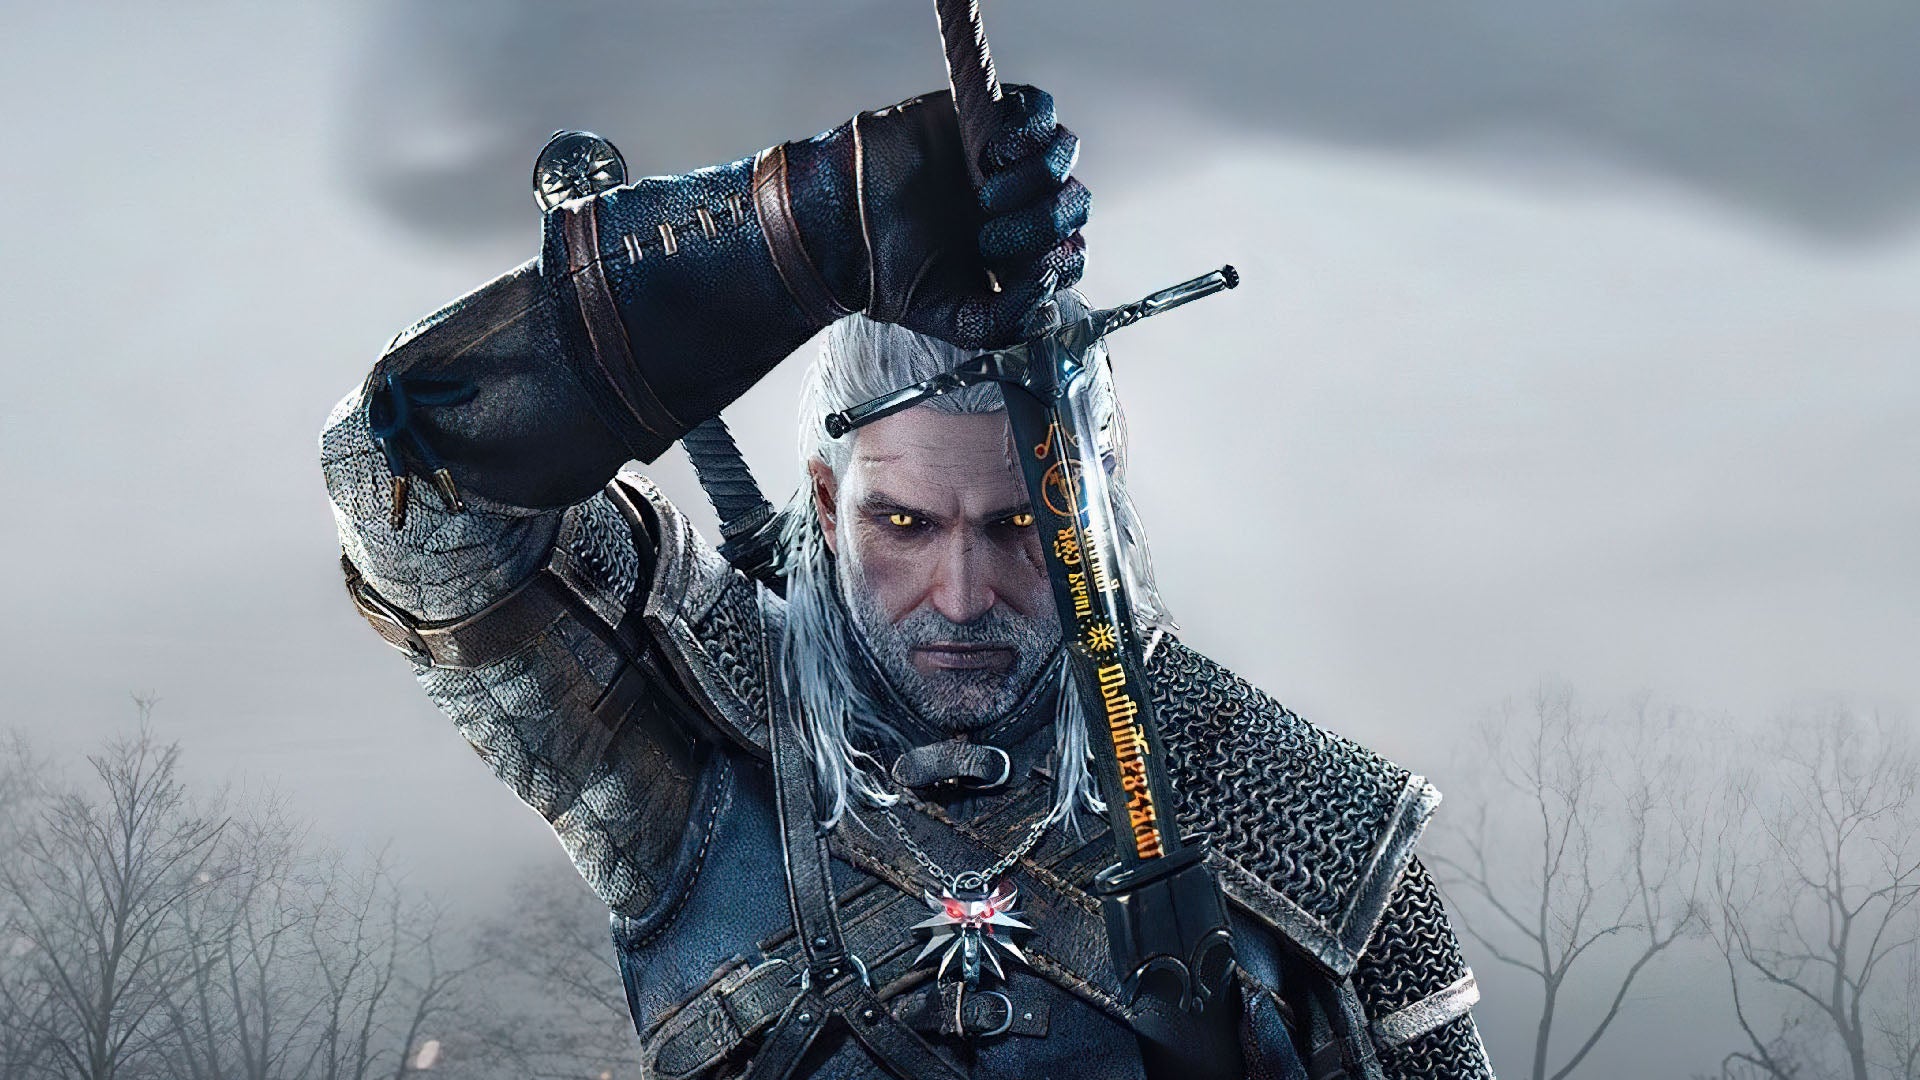 Image for The Witcher 3 next-gen: ray tracing and performance modes tested on PS5 and Xbox Series X